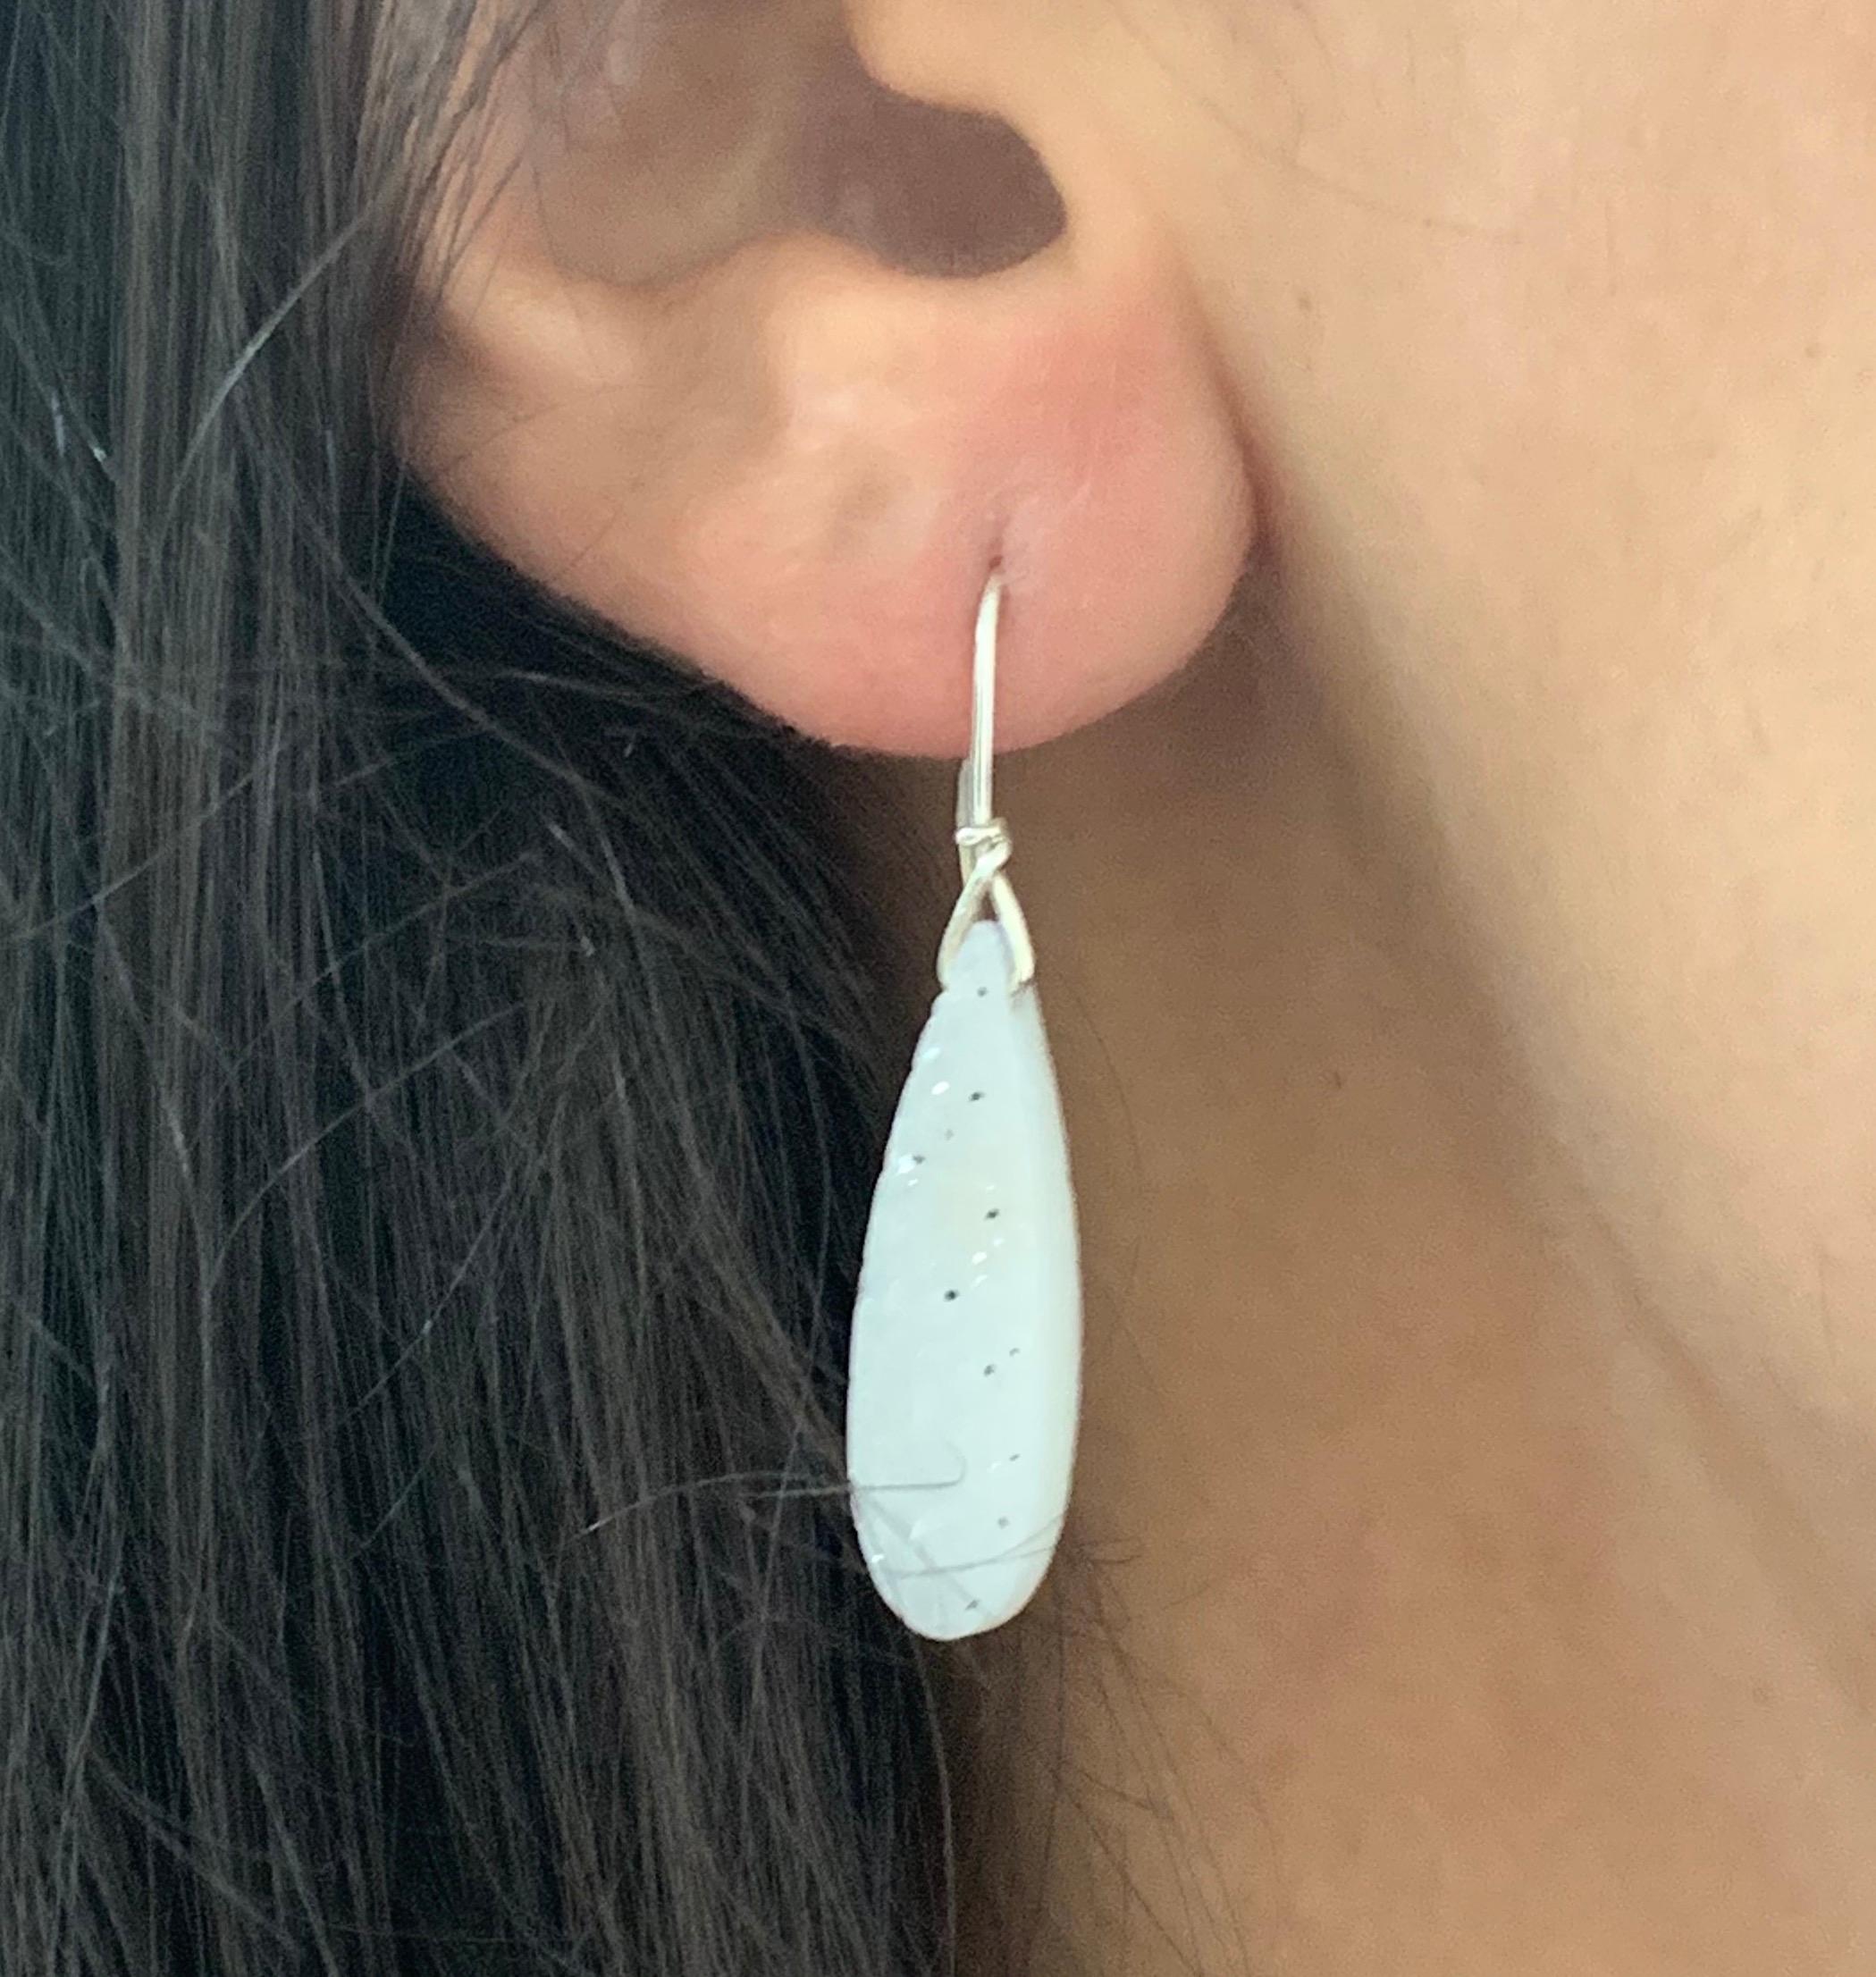 A stunning piece, these Druzy stones are a perfect match in quality and color. These earrings will have all eyes on you!

Material: Sterling Silver
Center Stone Details: Two Pear Shaped Druzys